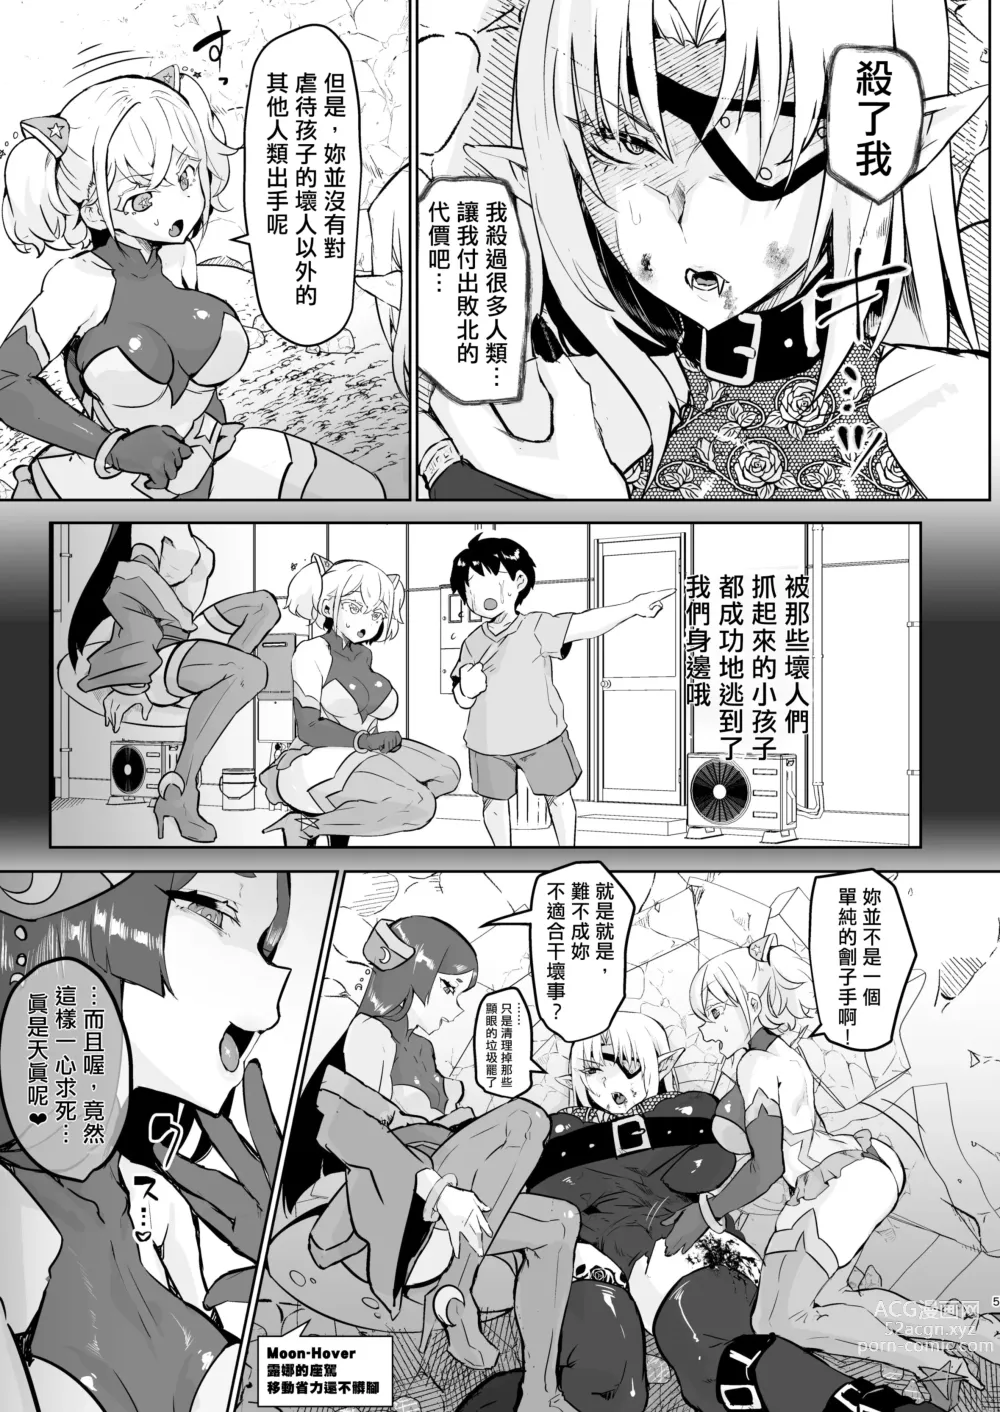 Page 5 of doujinshi 邪恶组织女干部正堕